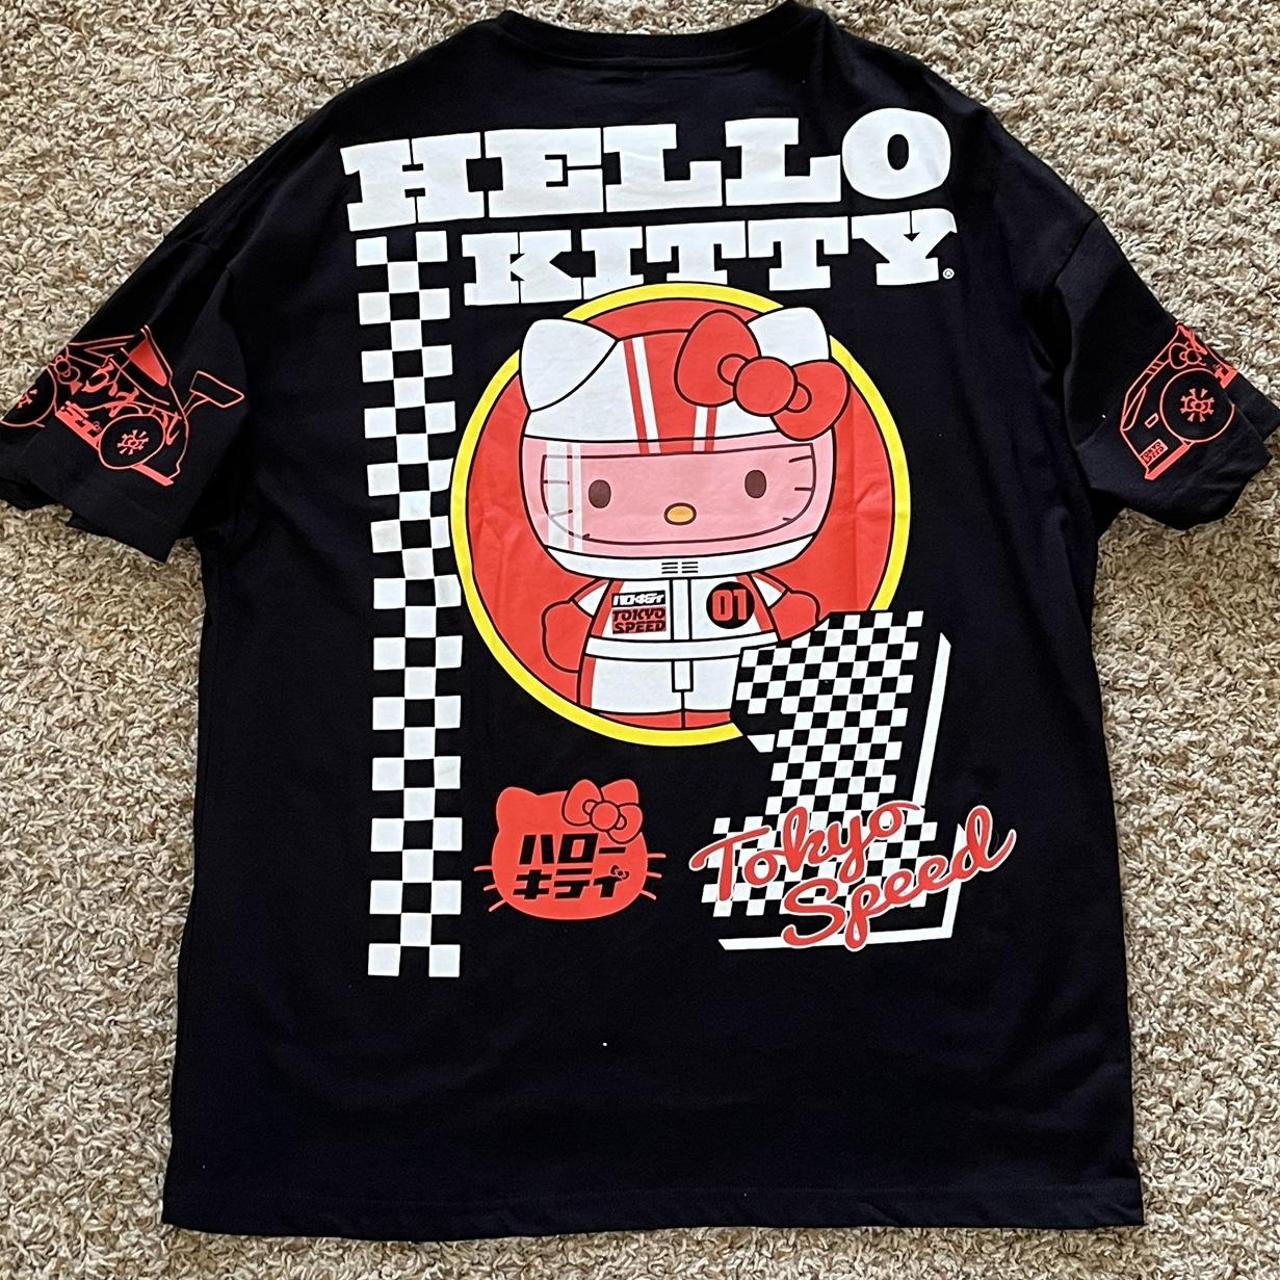 Hello Kitty Racer Tee XL, New with tags. Large and